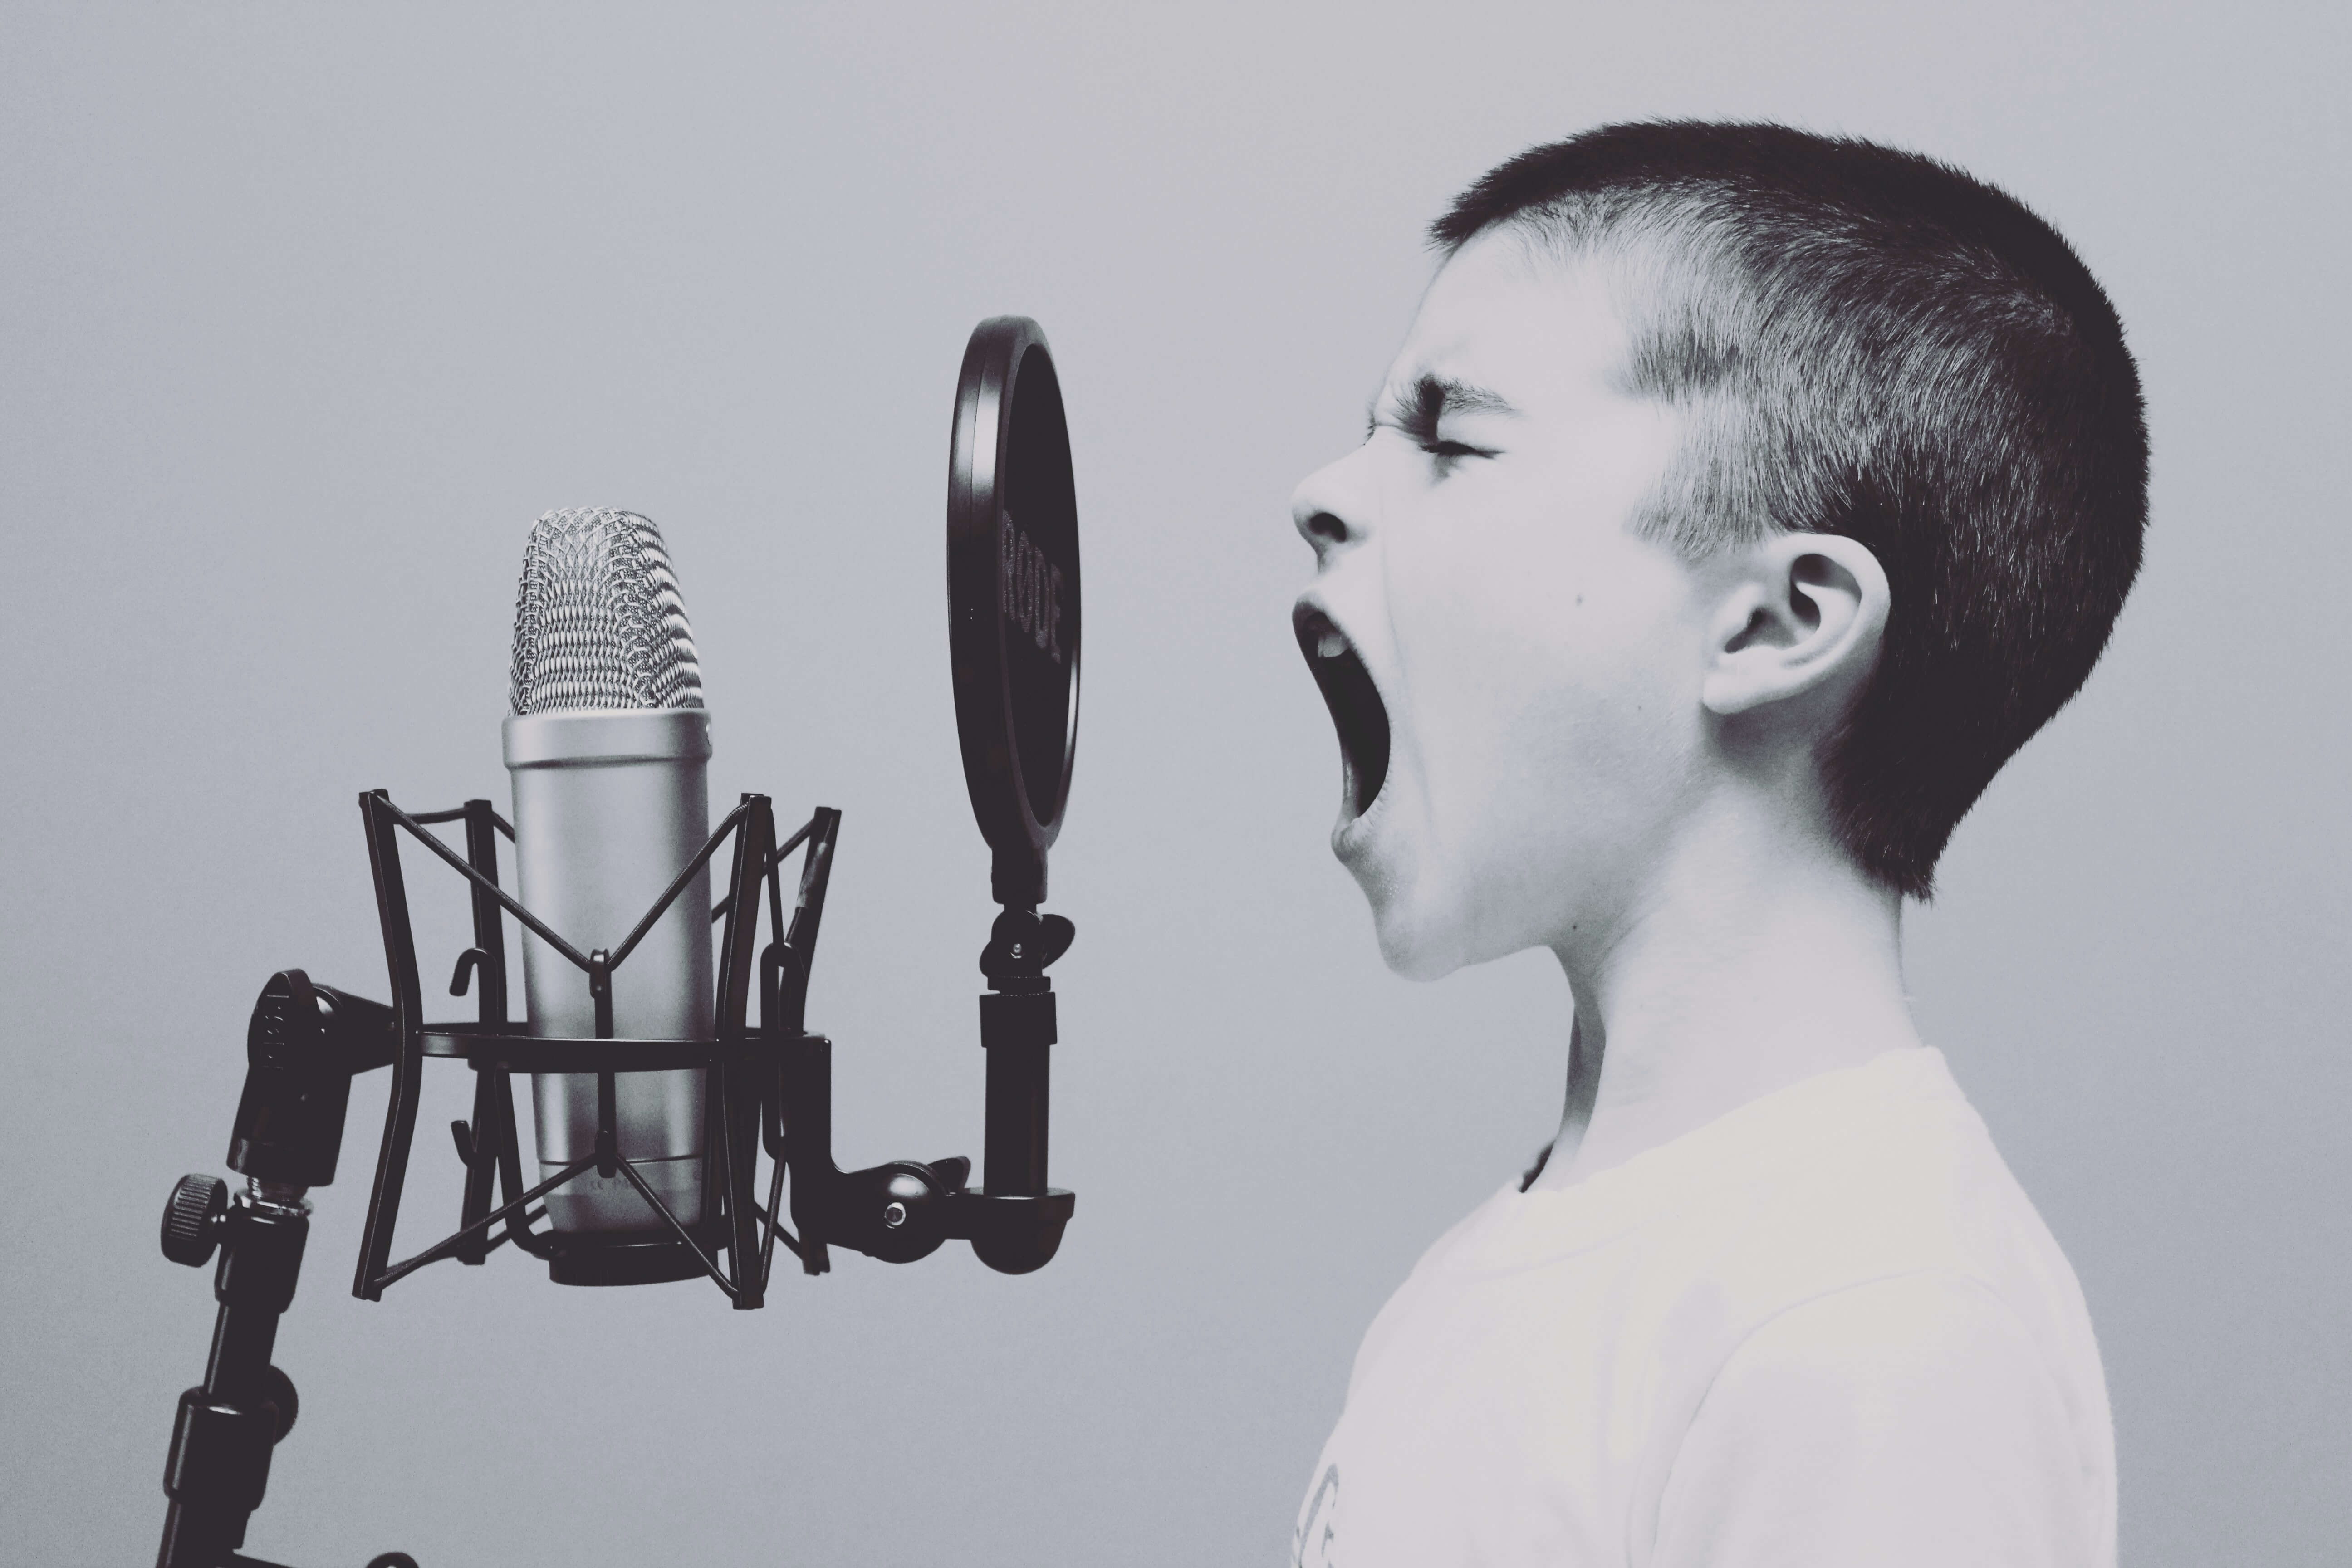 A black and white photo of a child screaming into a microphone